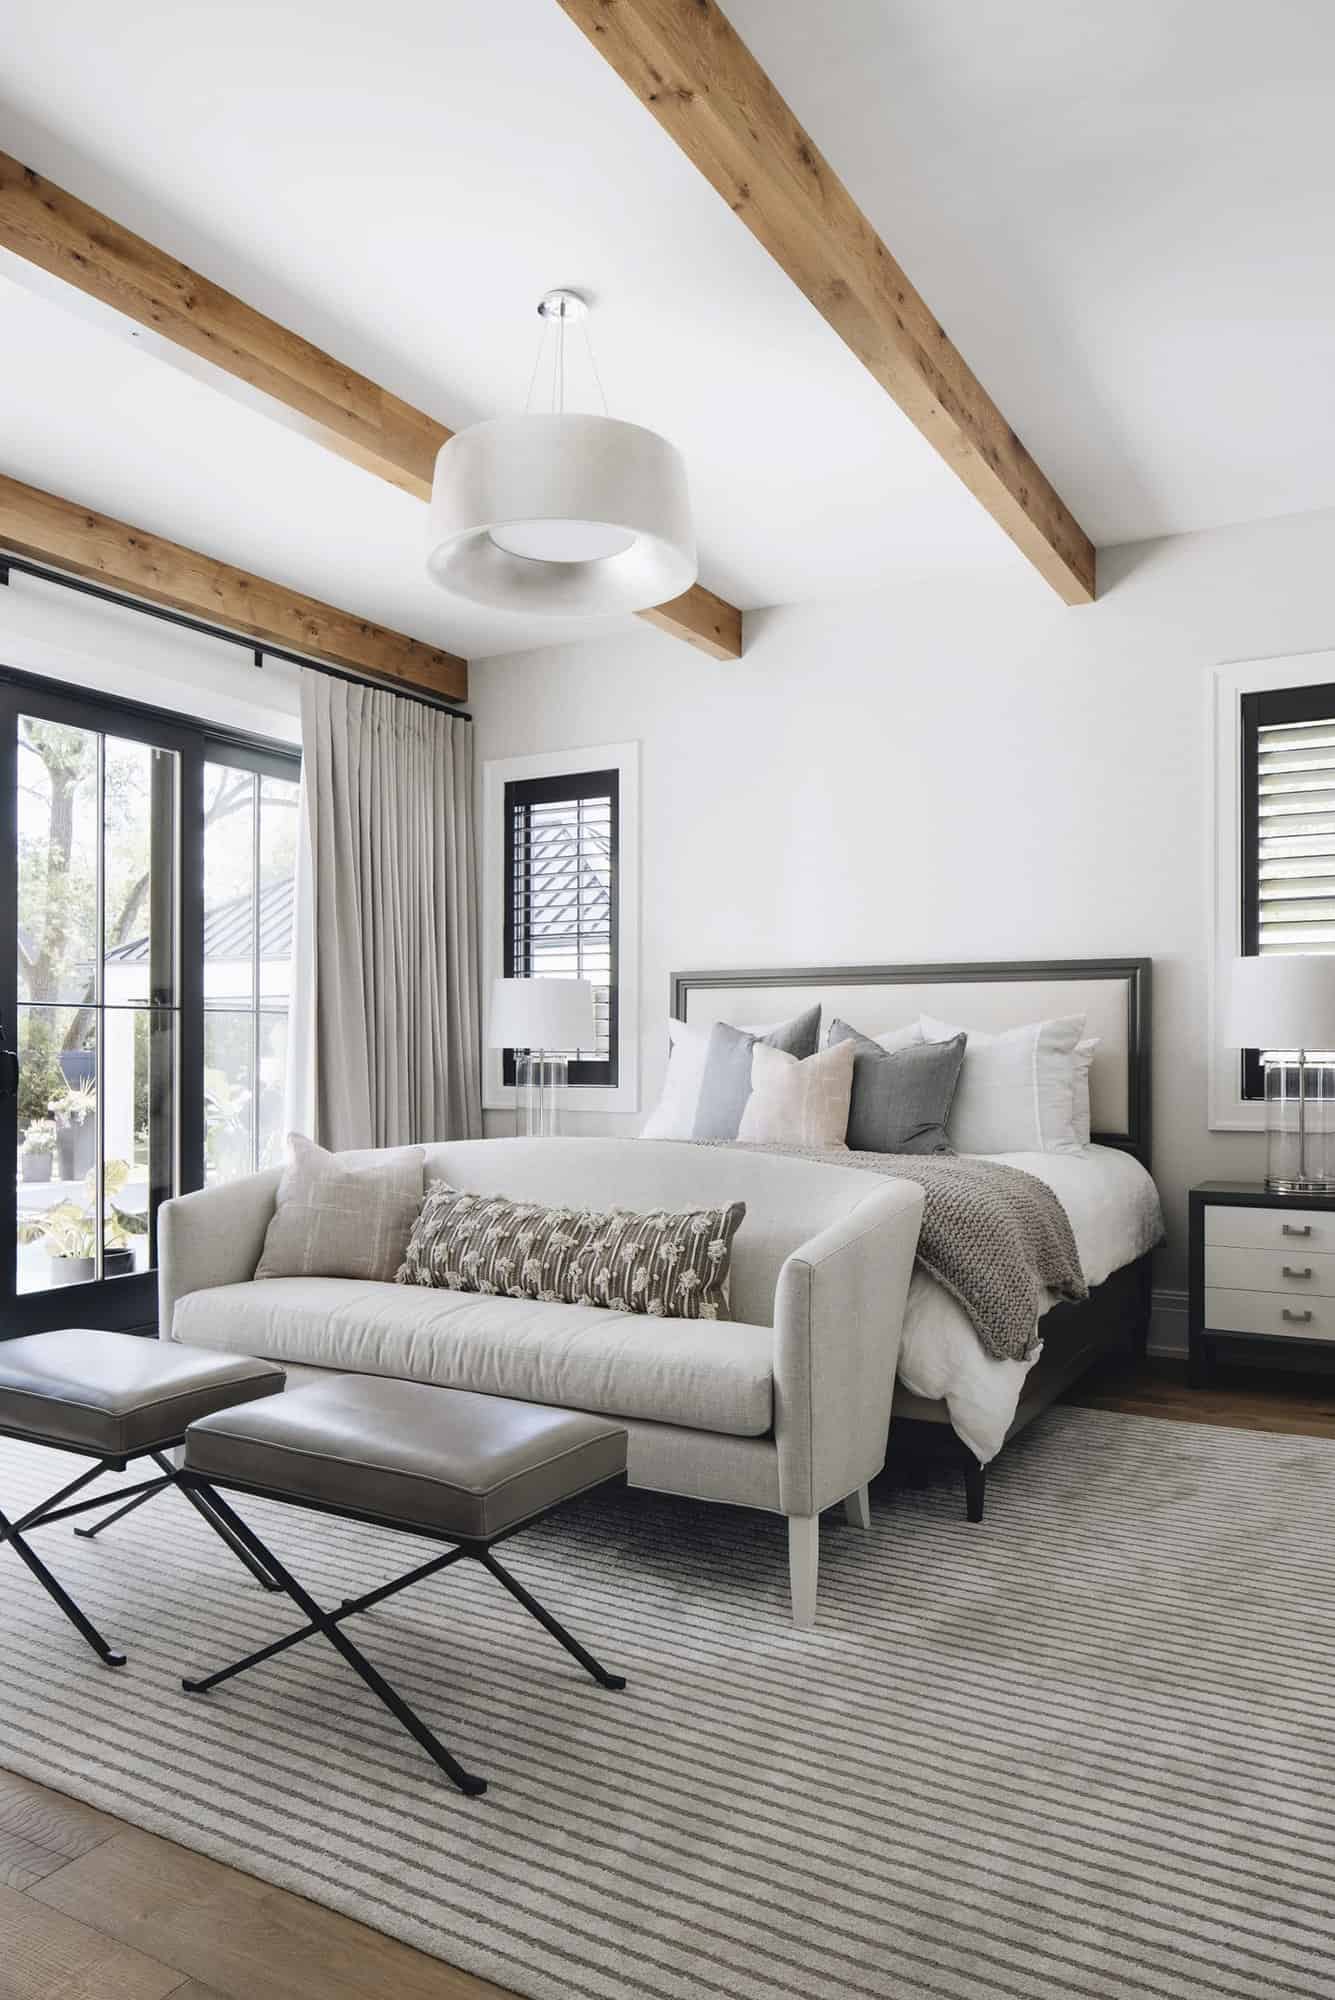  transitional-style-bedroom